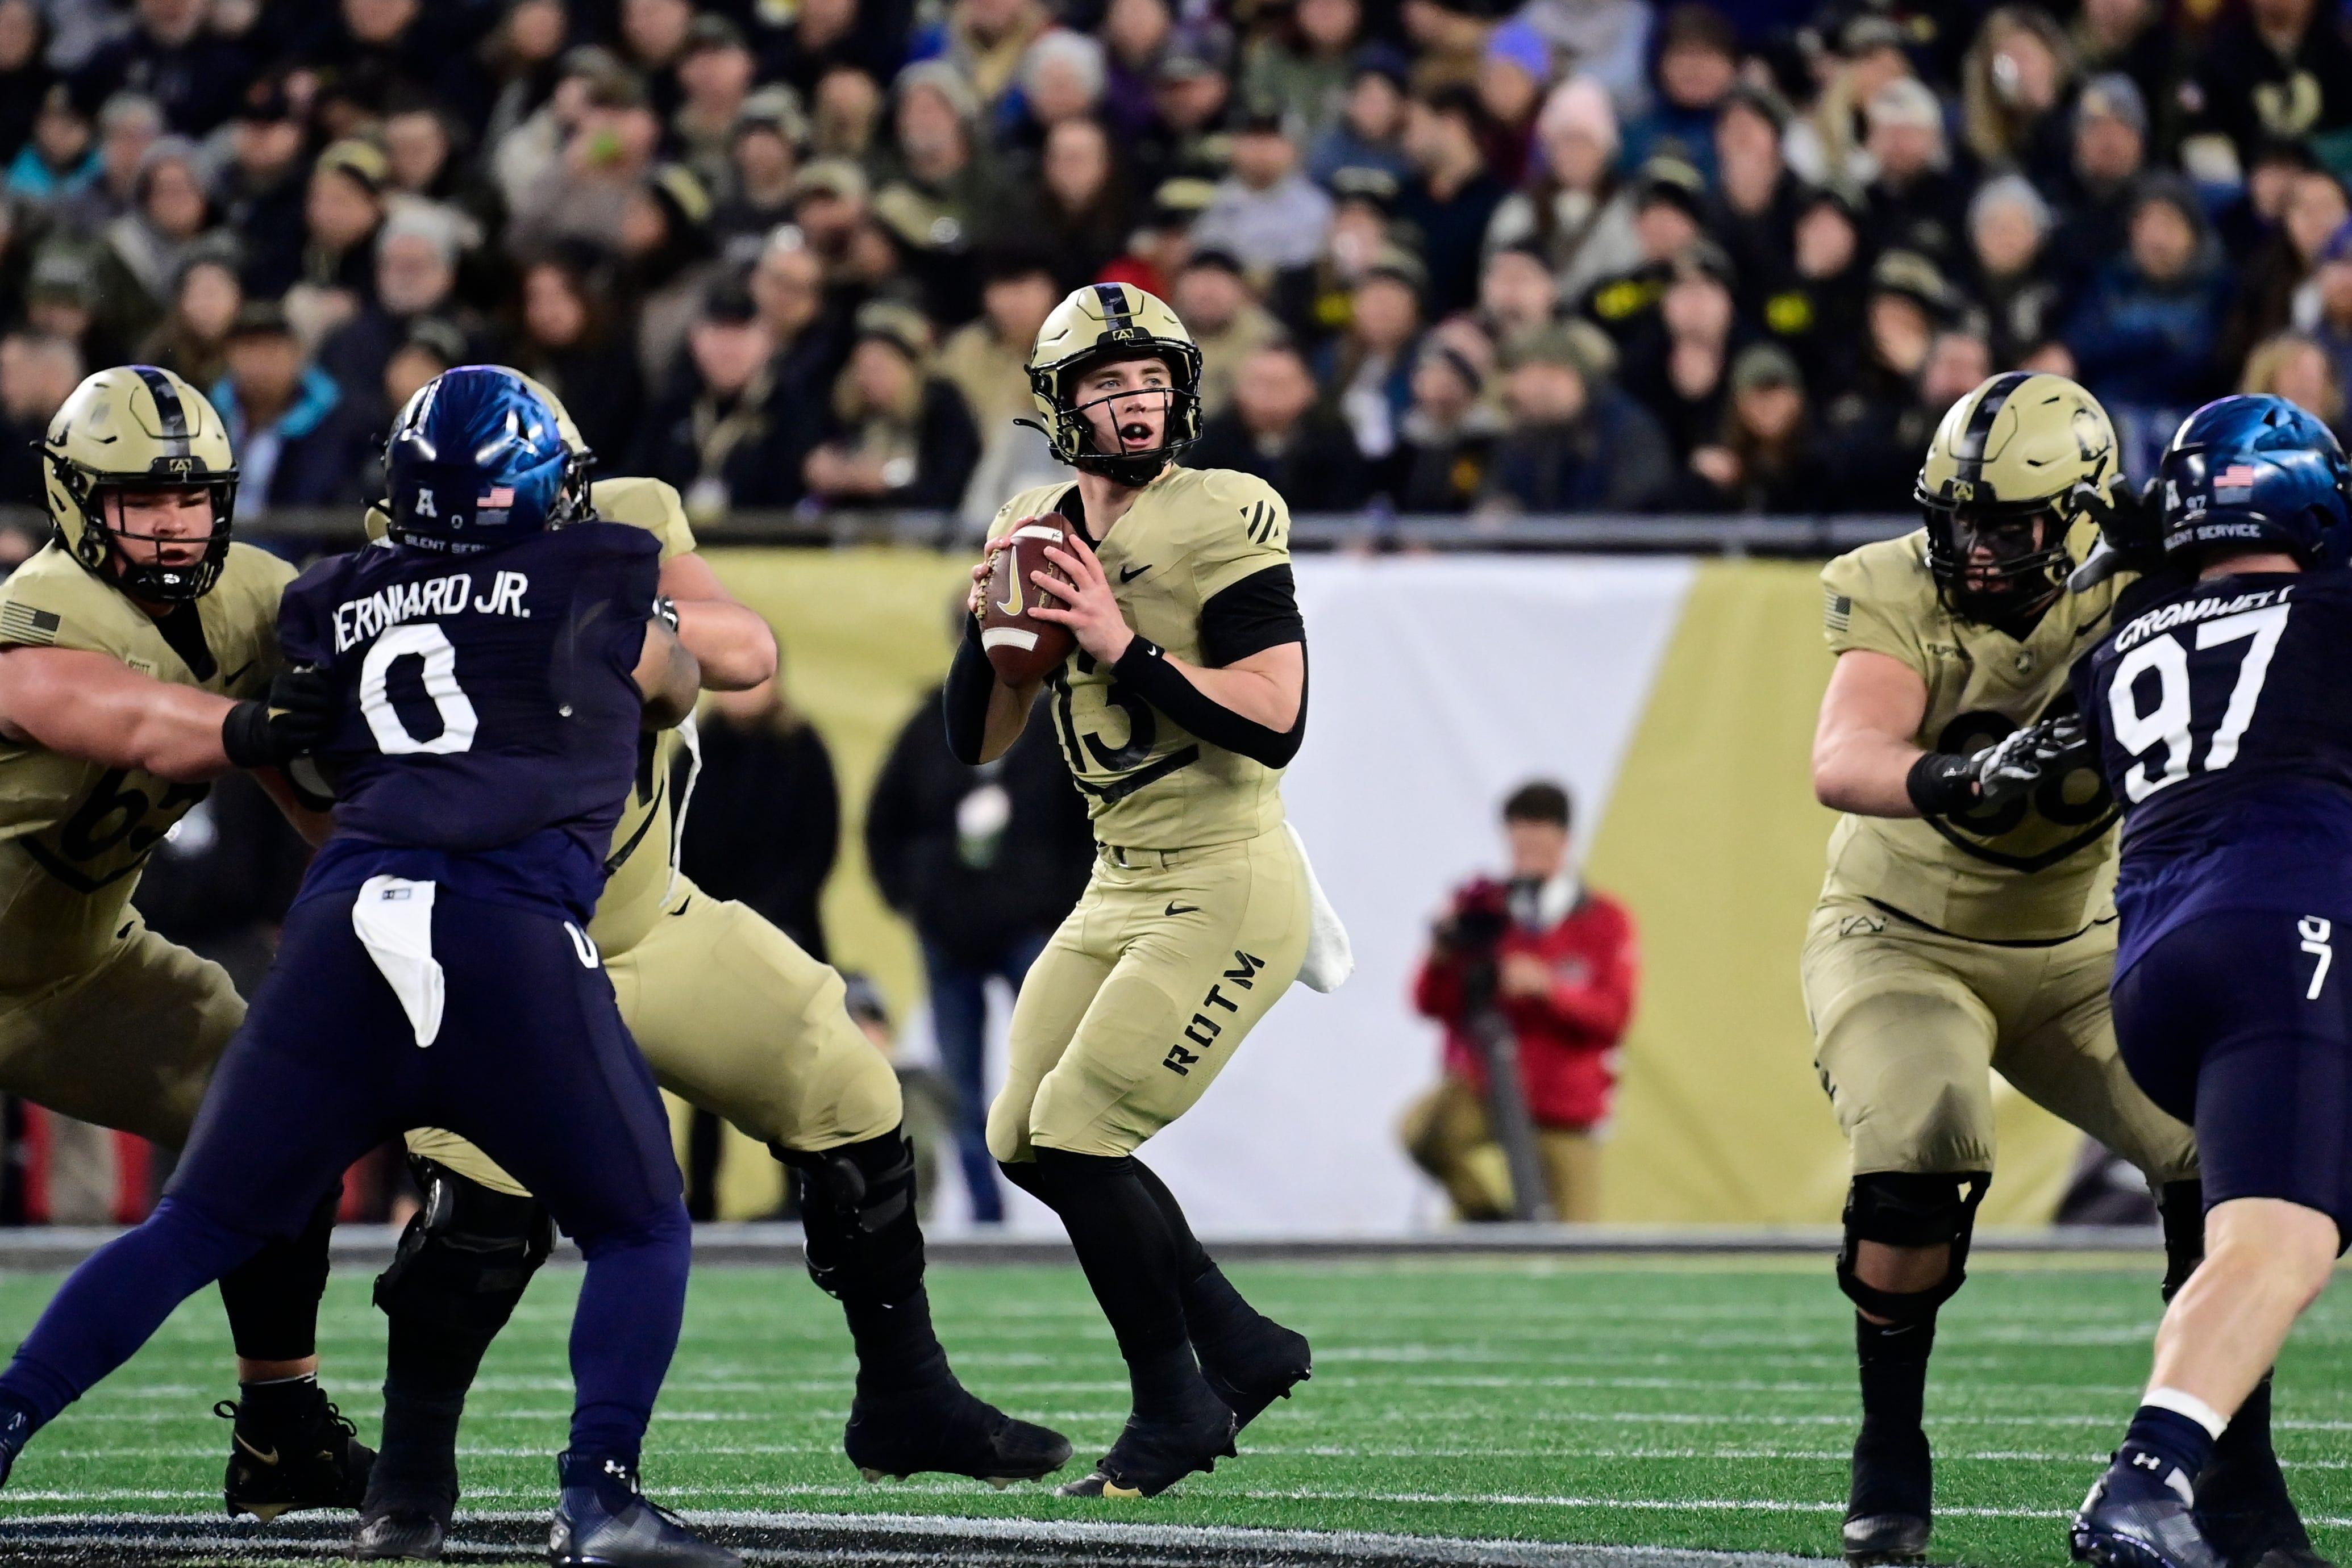 Army Black Knights quarterback Bryson Daily (13) looks to pass the ball during the first half against the Navy Midshipmen at Gillette Stadium in Foxborough, Massachusetts.